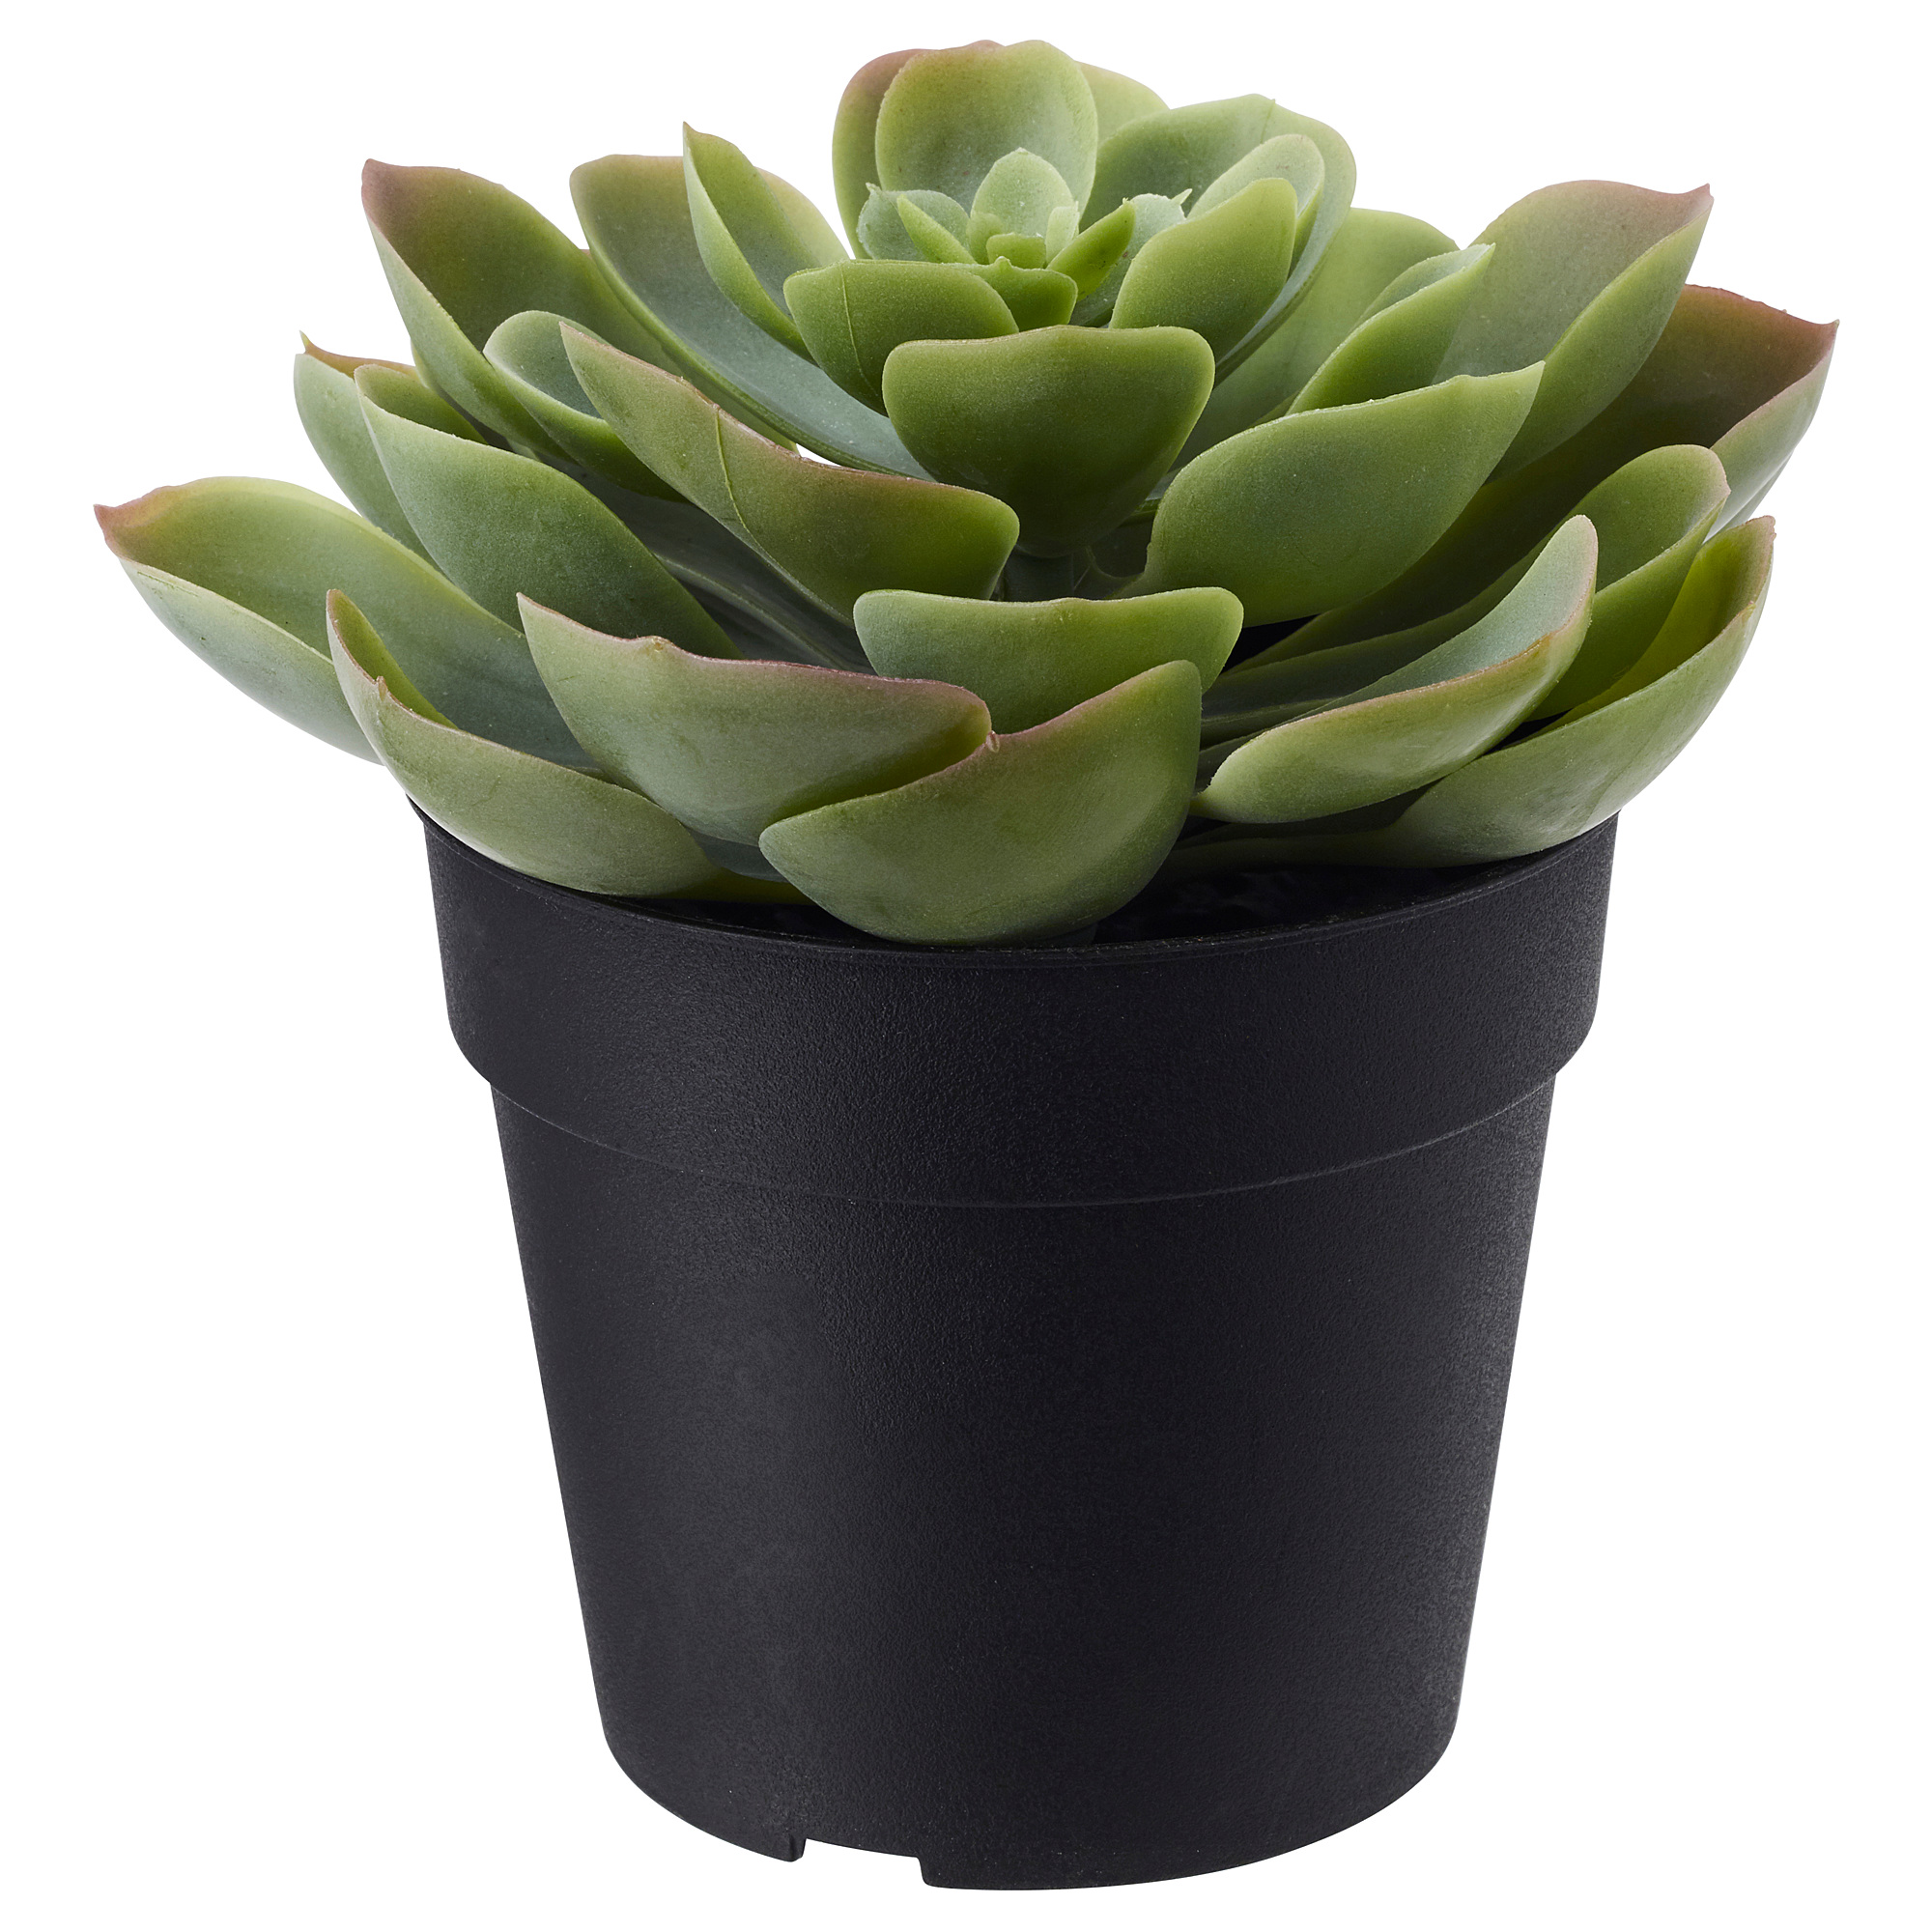 FEJKA artificial potted plant